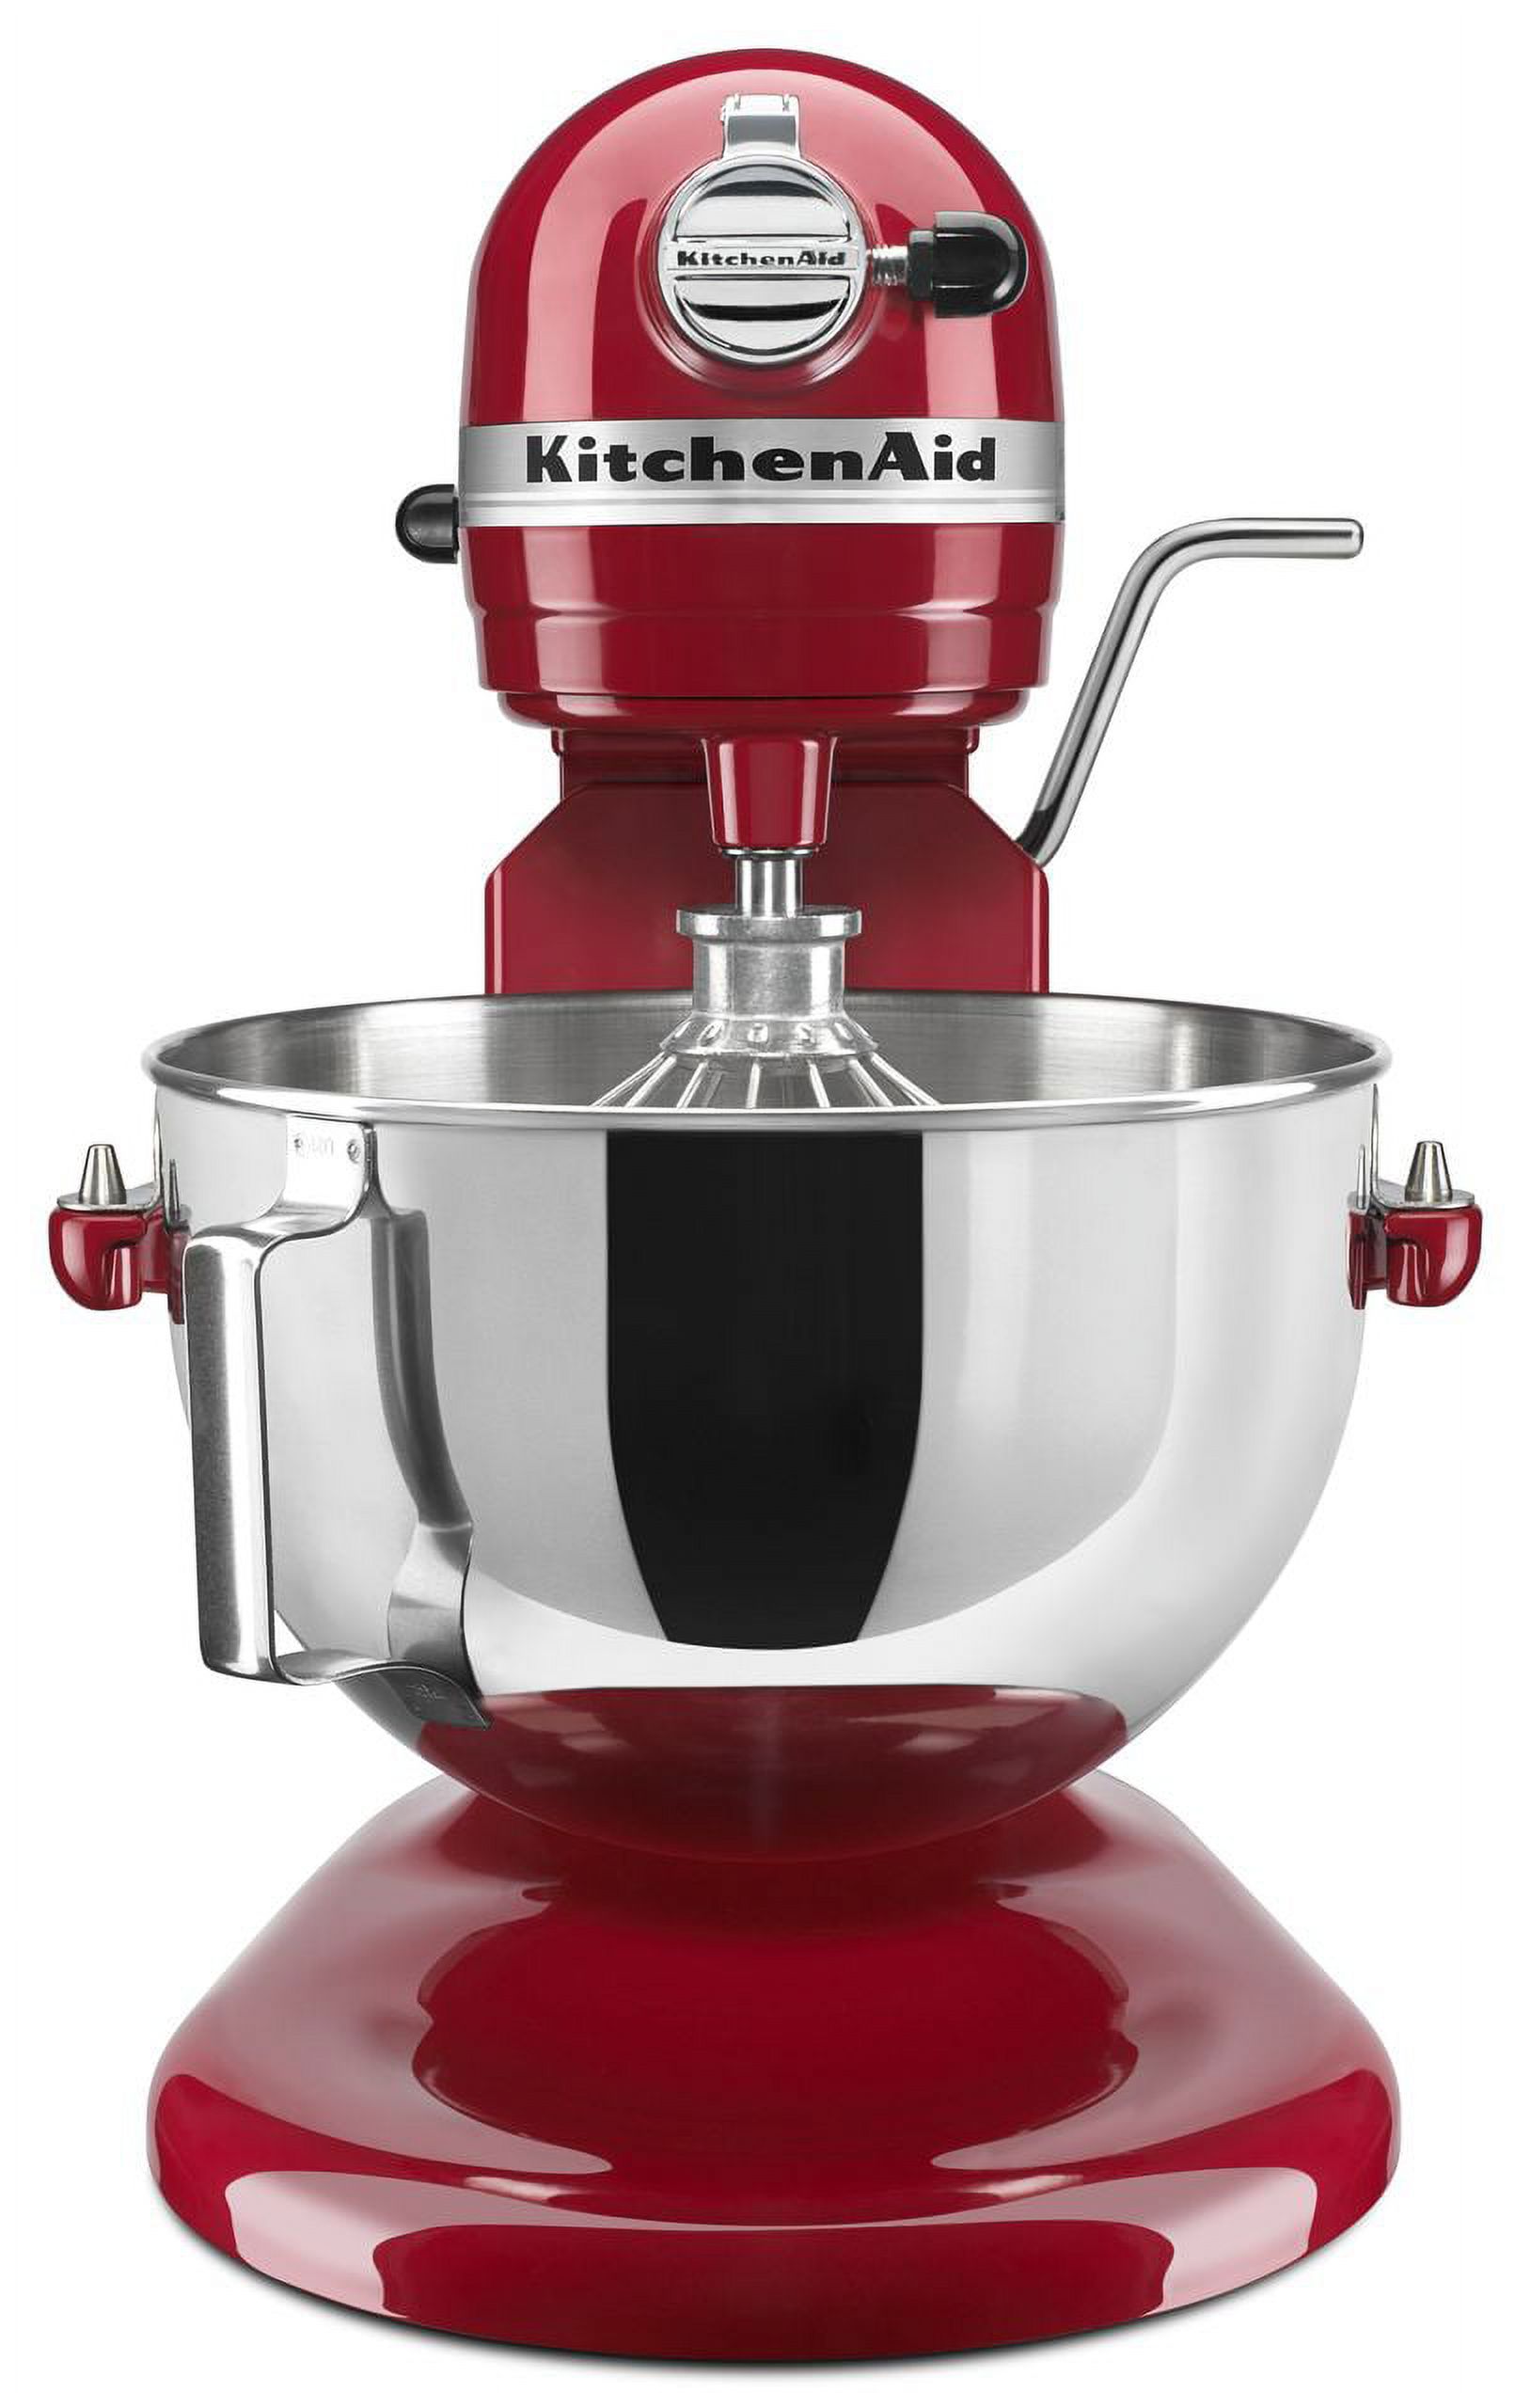 KitchenAid Professional 5 Plus Series 5 Qt. Stand Mixer - Empire Red - image 5 of 5